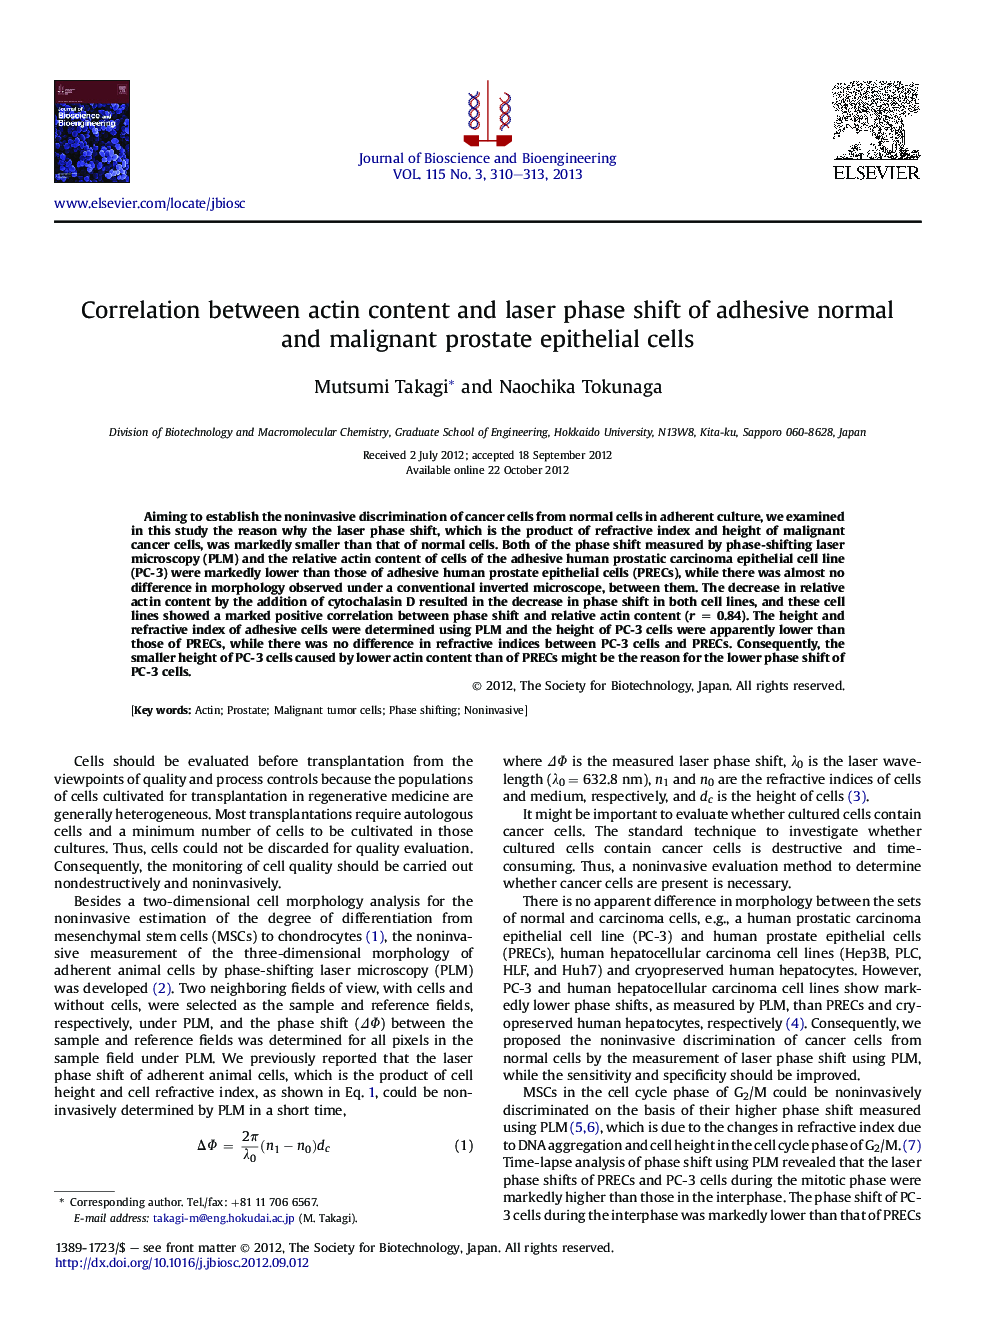 Correlation between actin content and laser phase shift of adhesive normal and malignant prostate epithelial cells